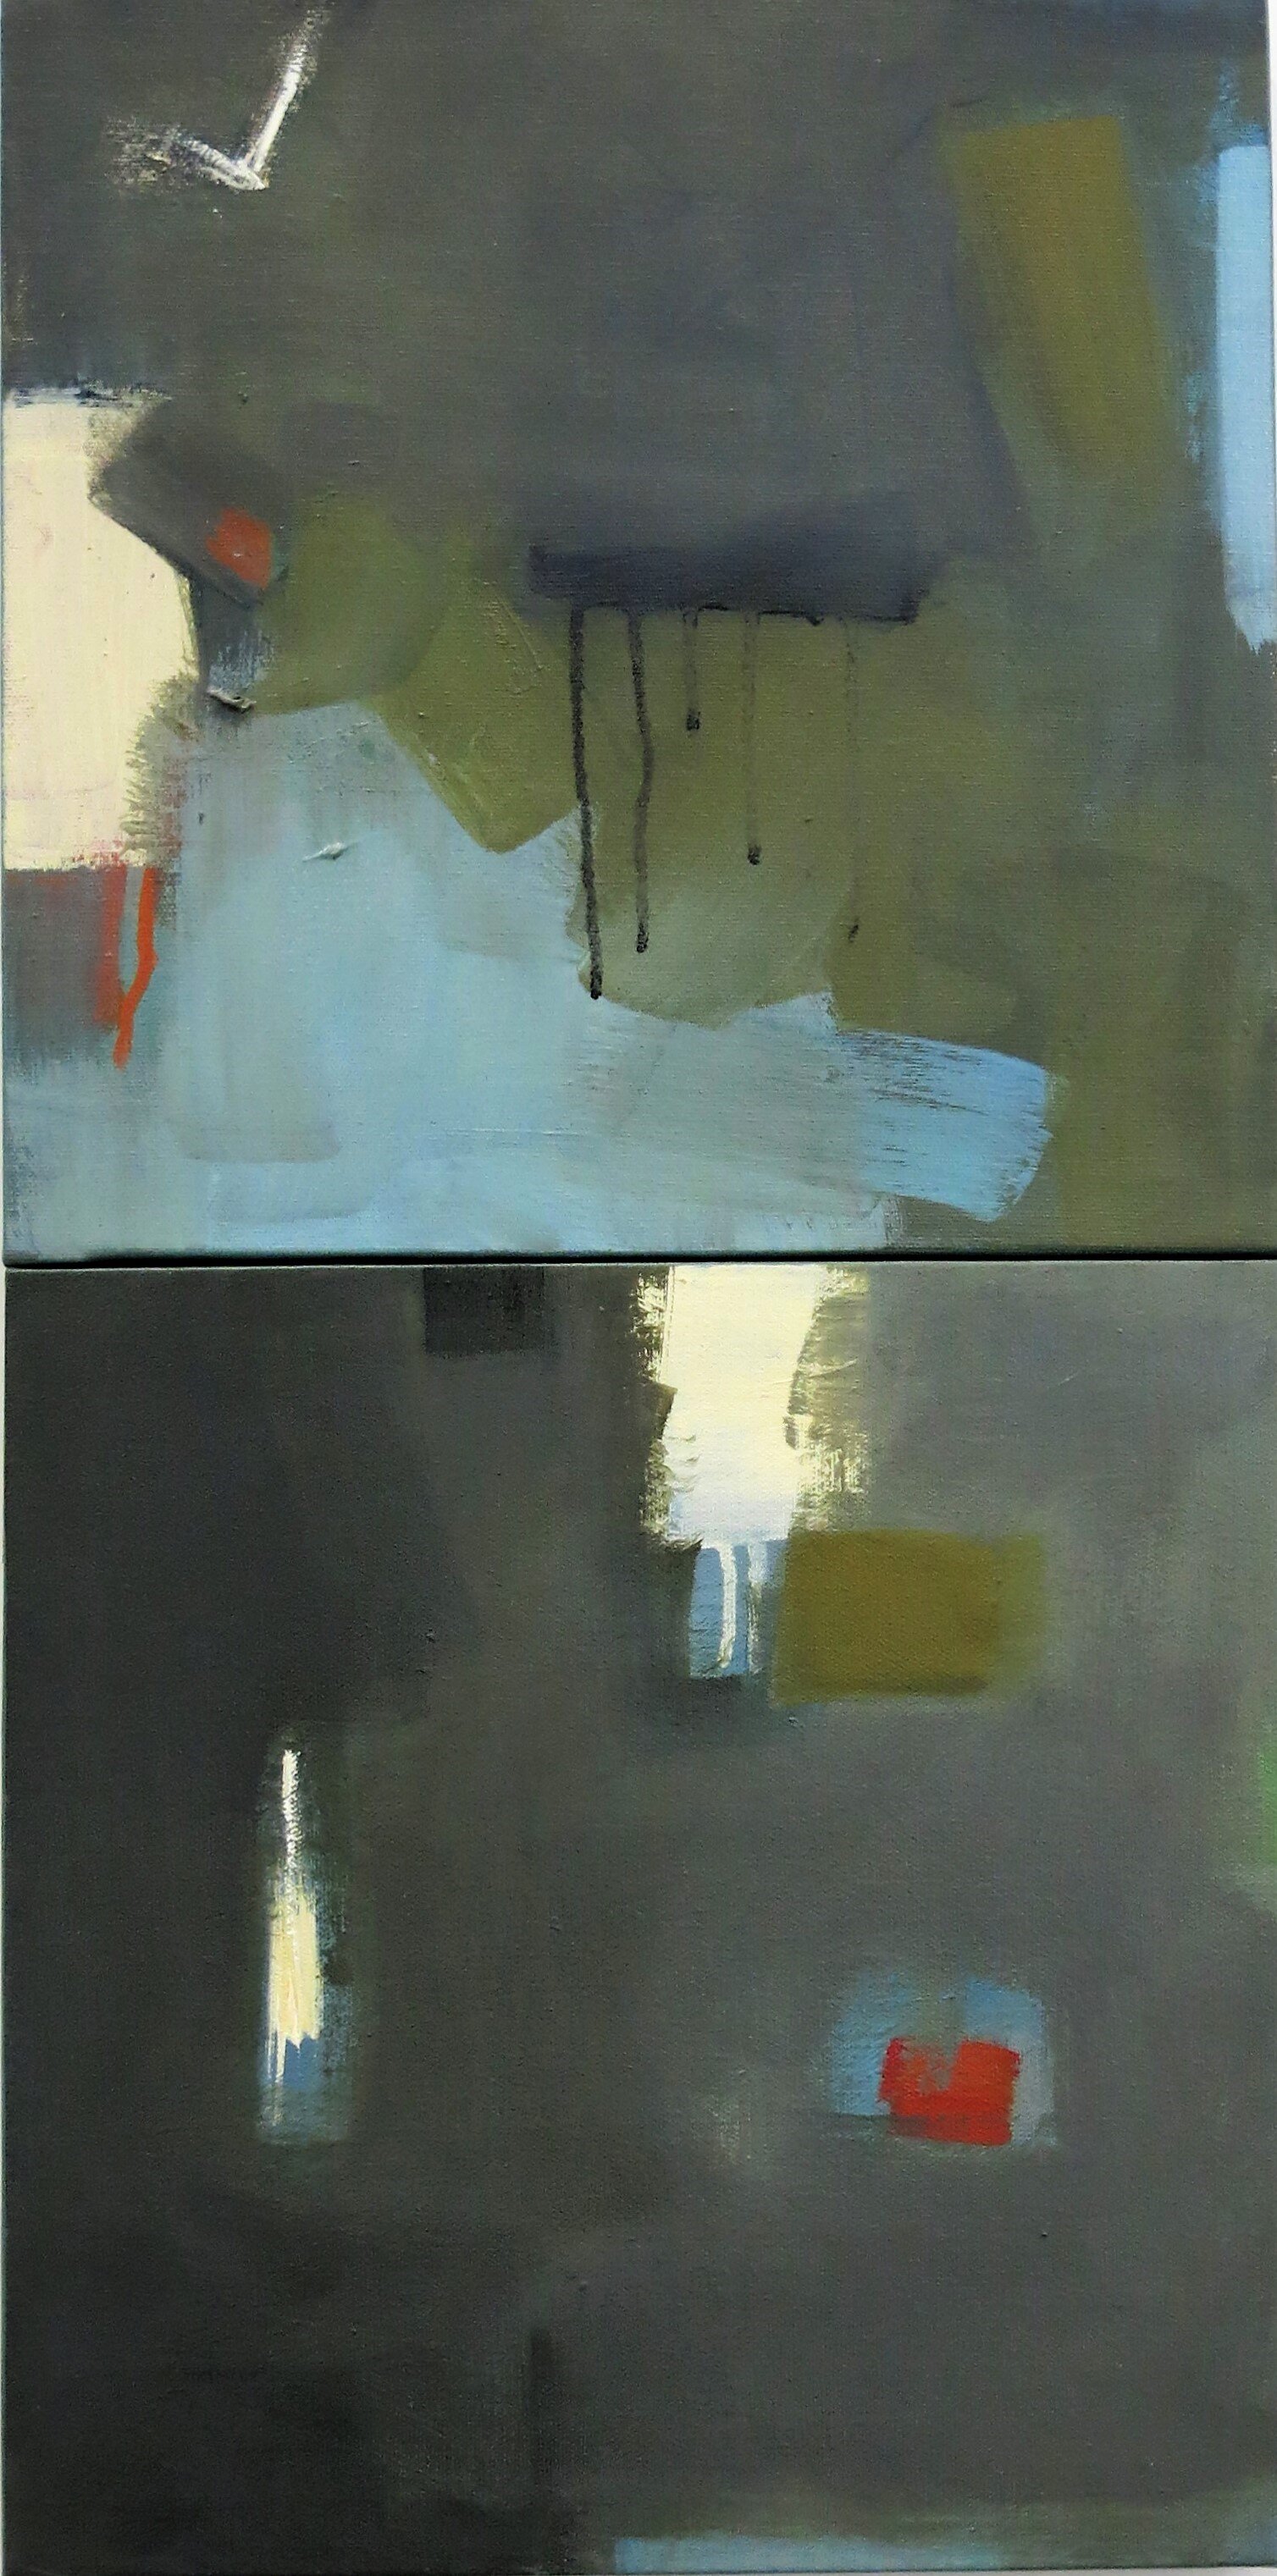  "Cabin Rules", Diptych, Oil, 24x12, $1400 